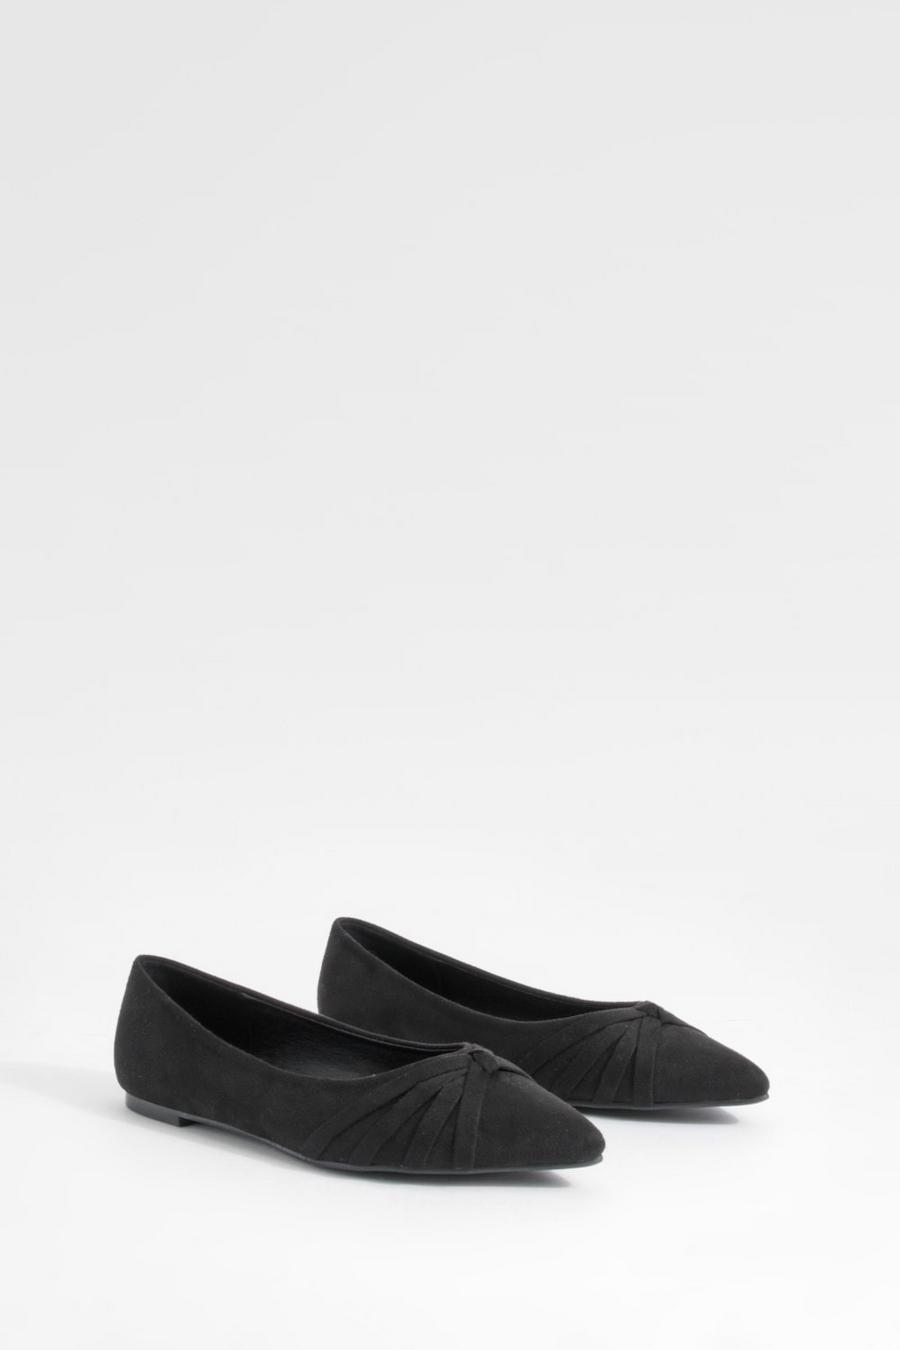 Black Wide Width Twist Front Pointed Flats image number 1